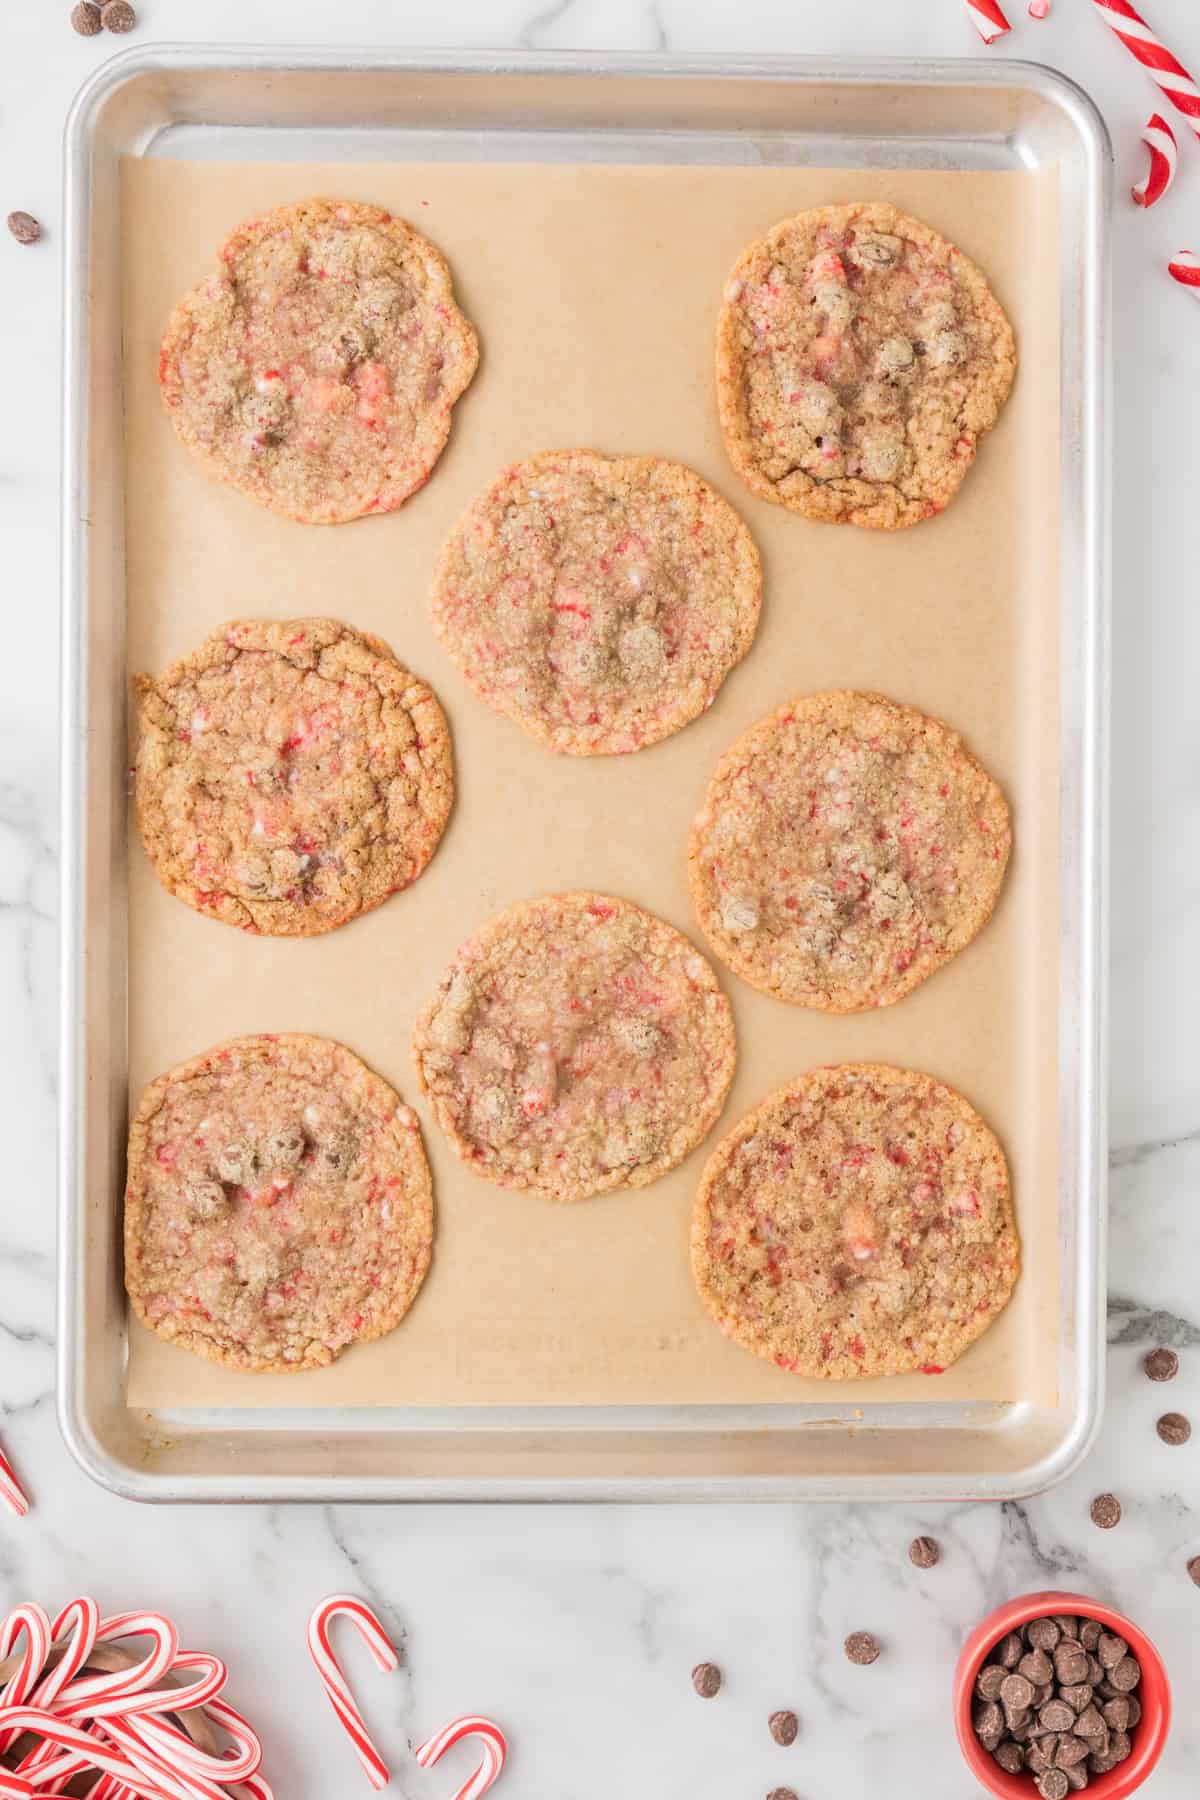 peppermint chocolate chip cookies on a baking sheet with candy canes.